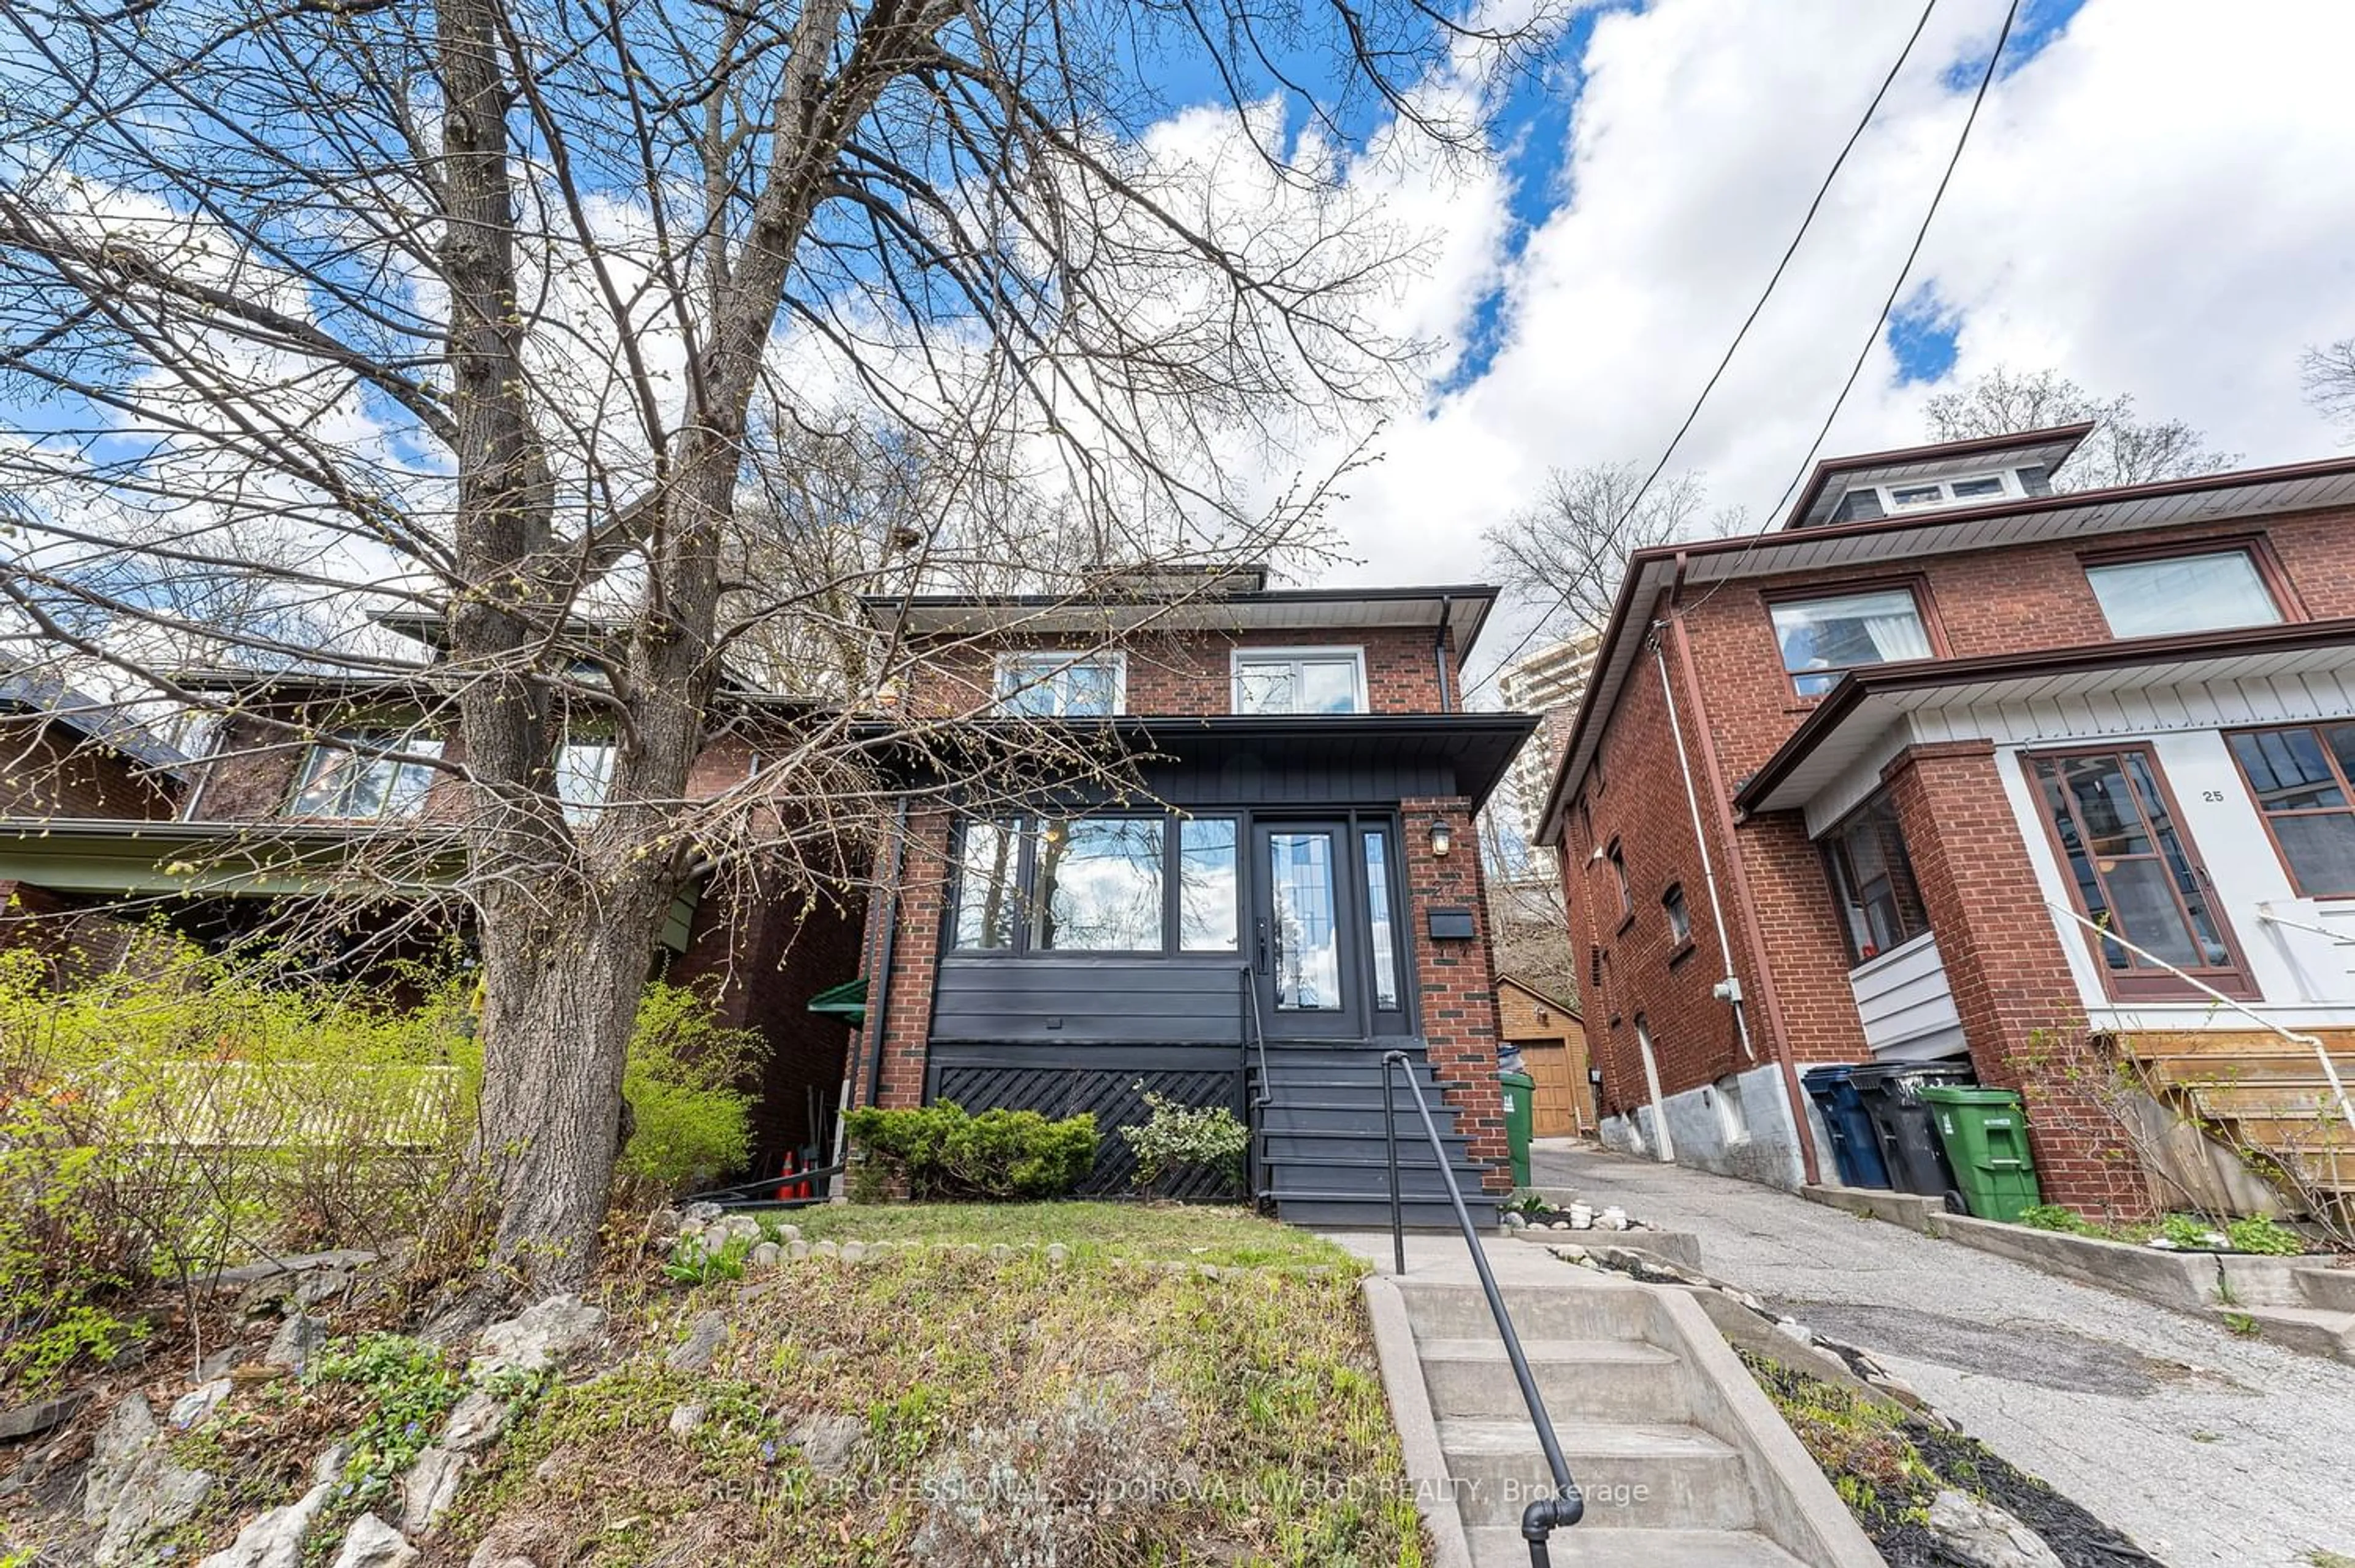 Frontside or backside of a home for 27 Parkview Gdns, Toronto Ontario M6P 2W1